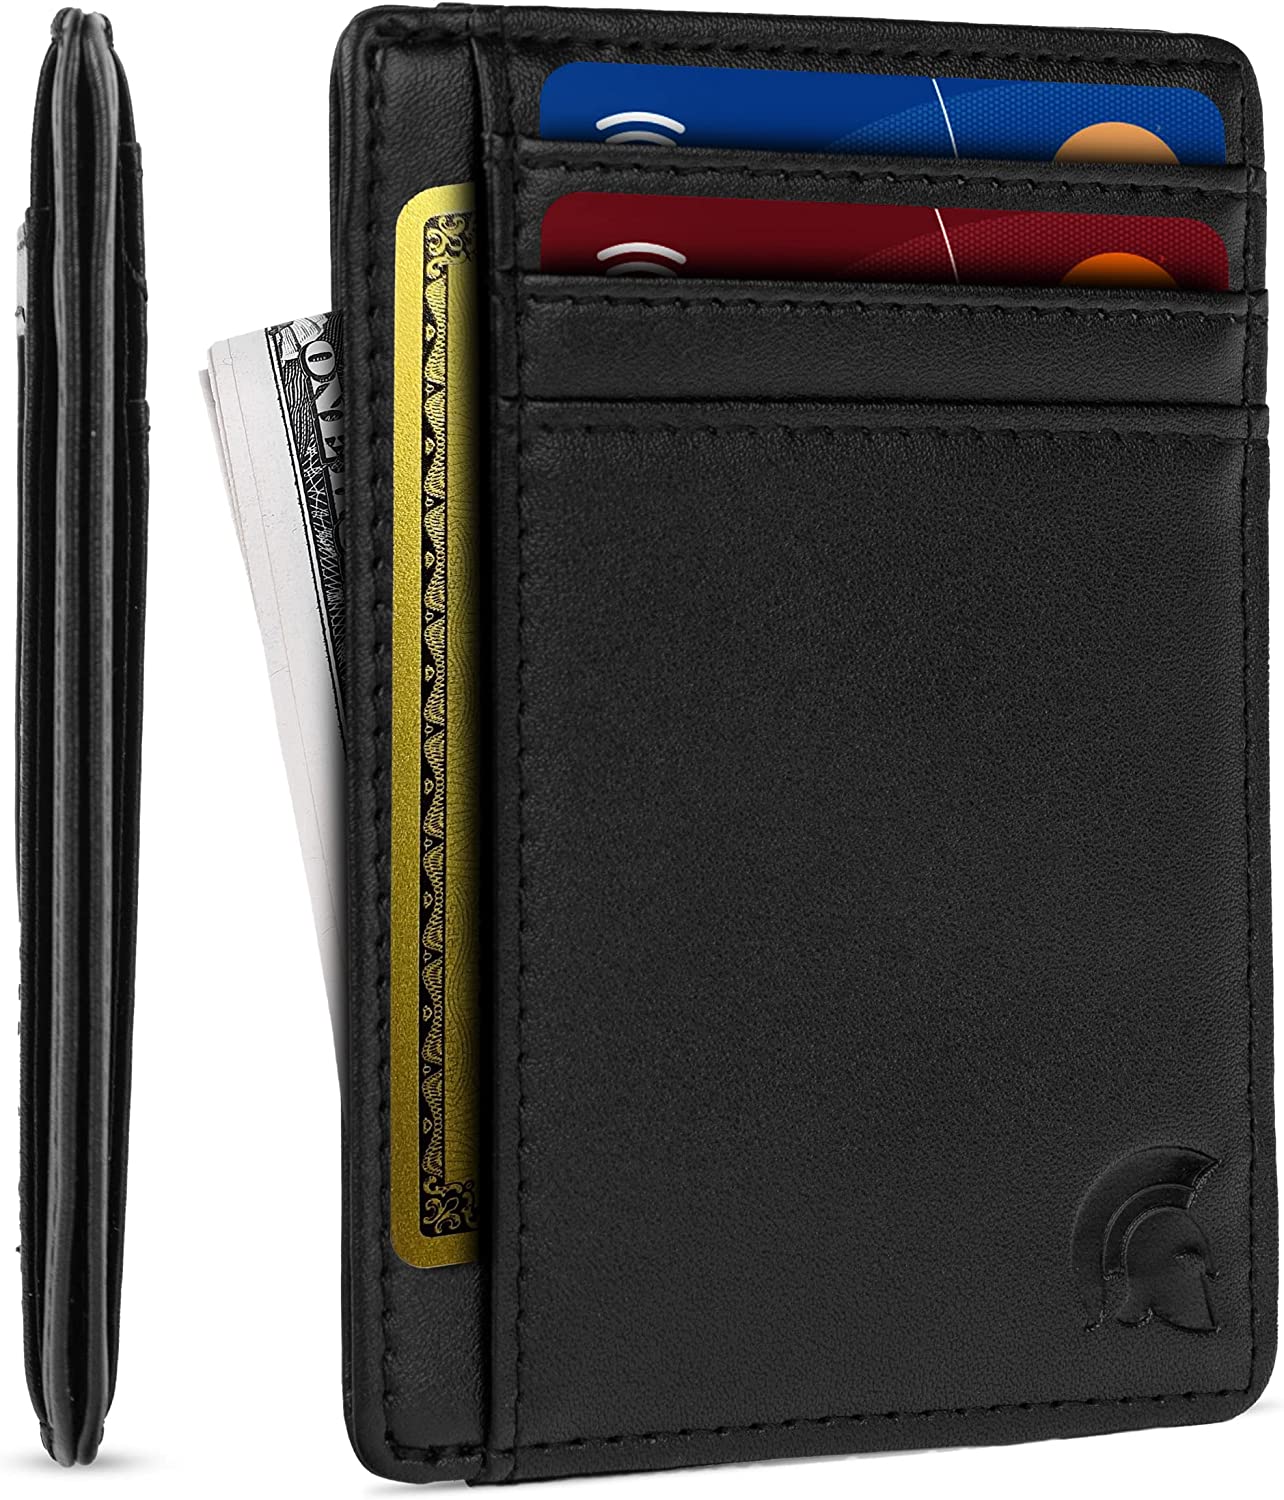  ZECICO Mens Slim Wallet Money Clip: Bifold Leanther Wallets  RFID Blocking Front Pocket Wallets Credit Card Holder with ID Window Gifts  for Men (Carbon Black/Orange) : Clothing, Shoes & Jewelry